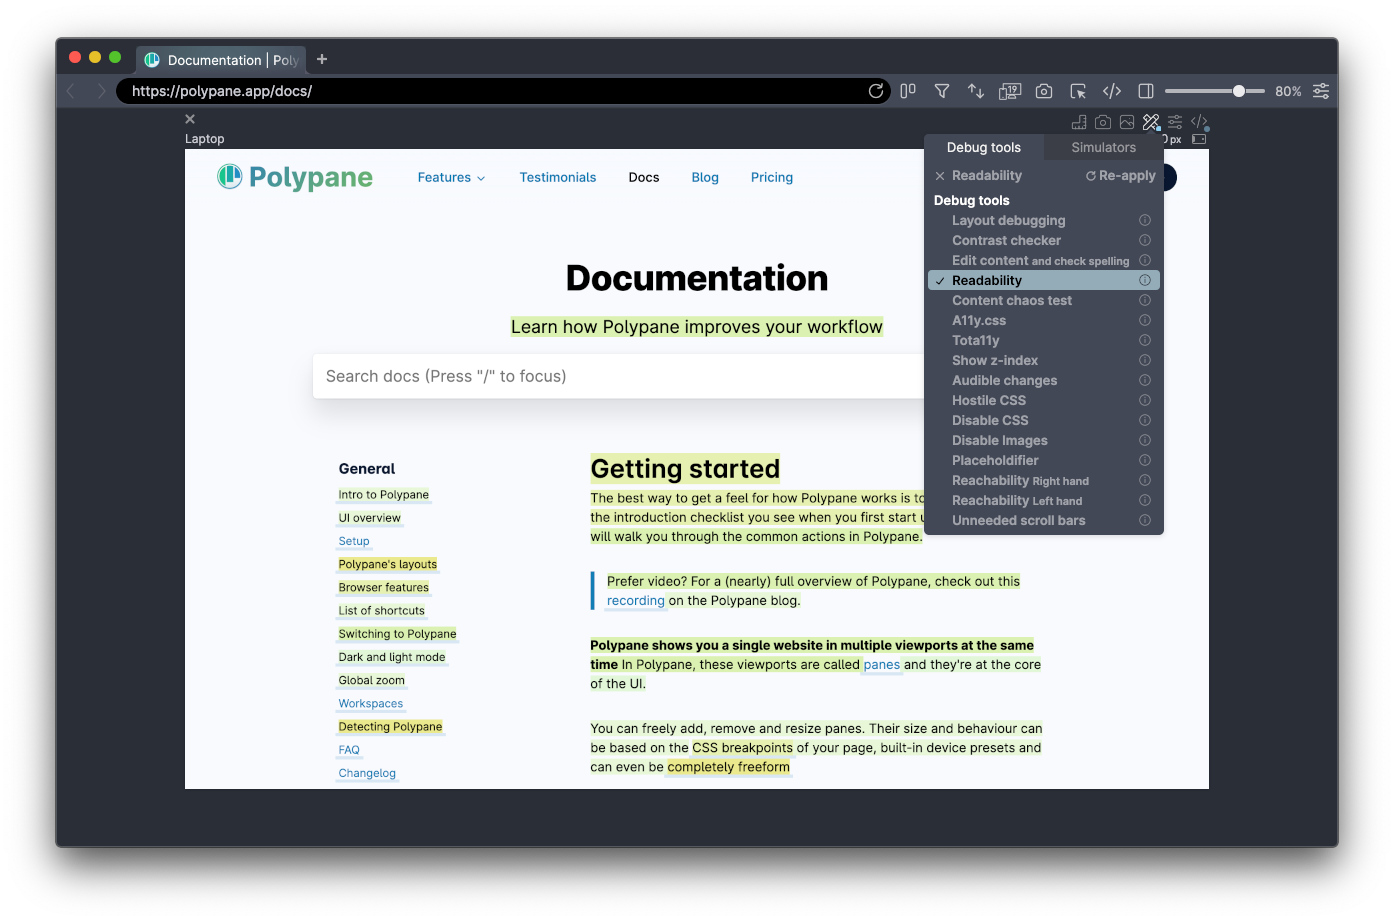 Readability overlay active on the Polypane docs page